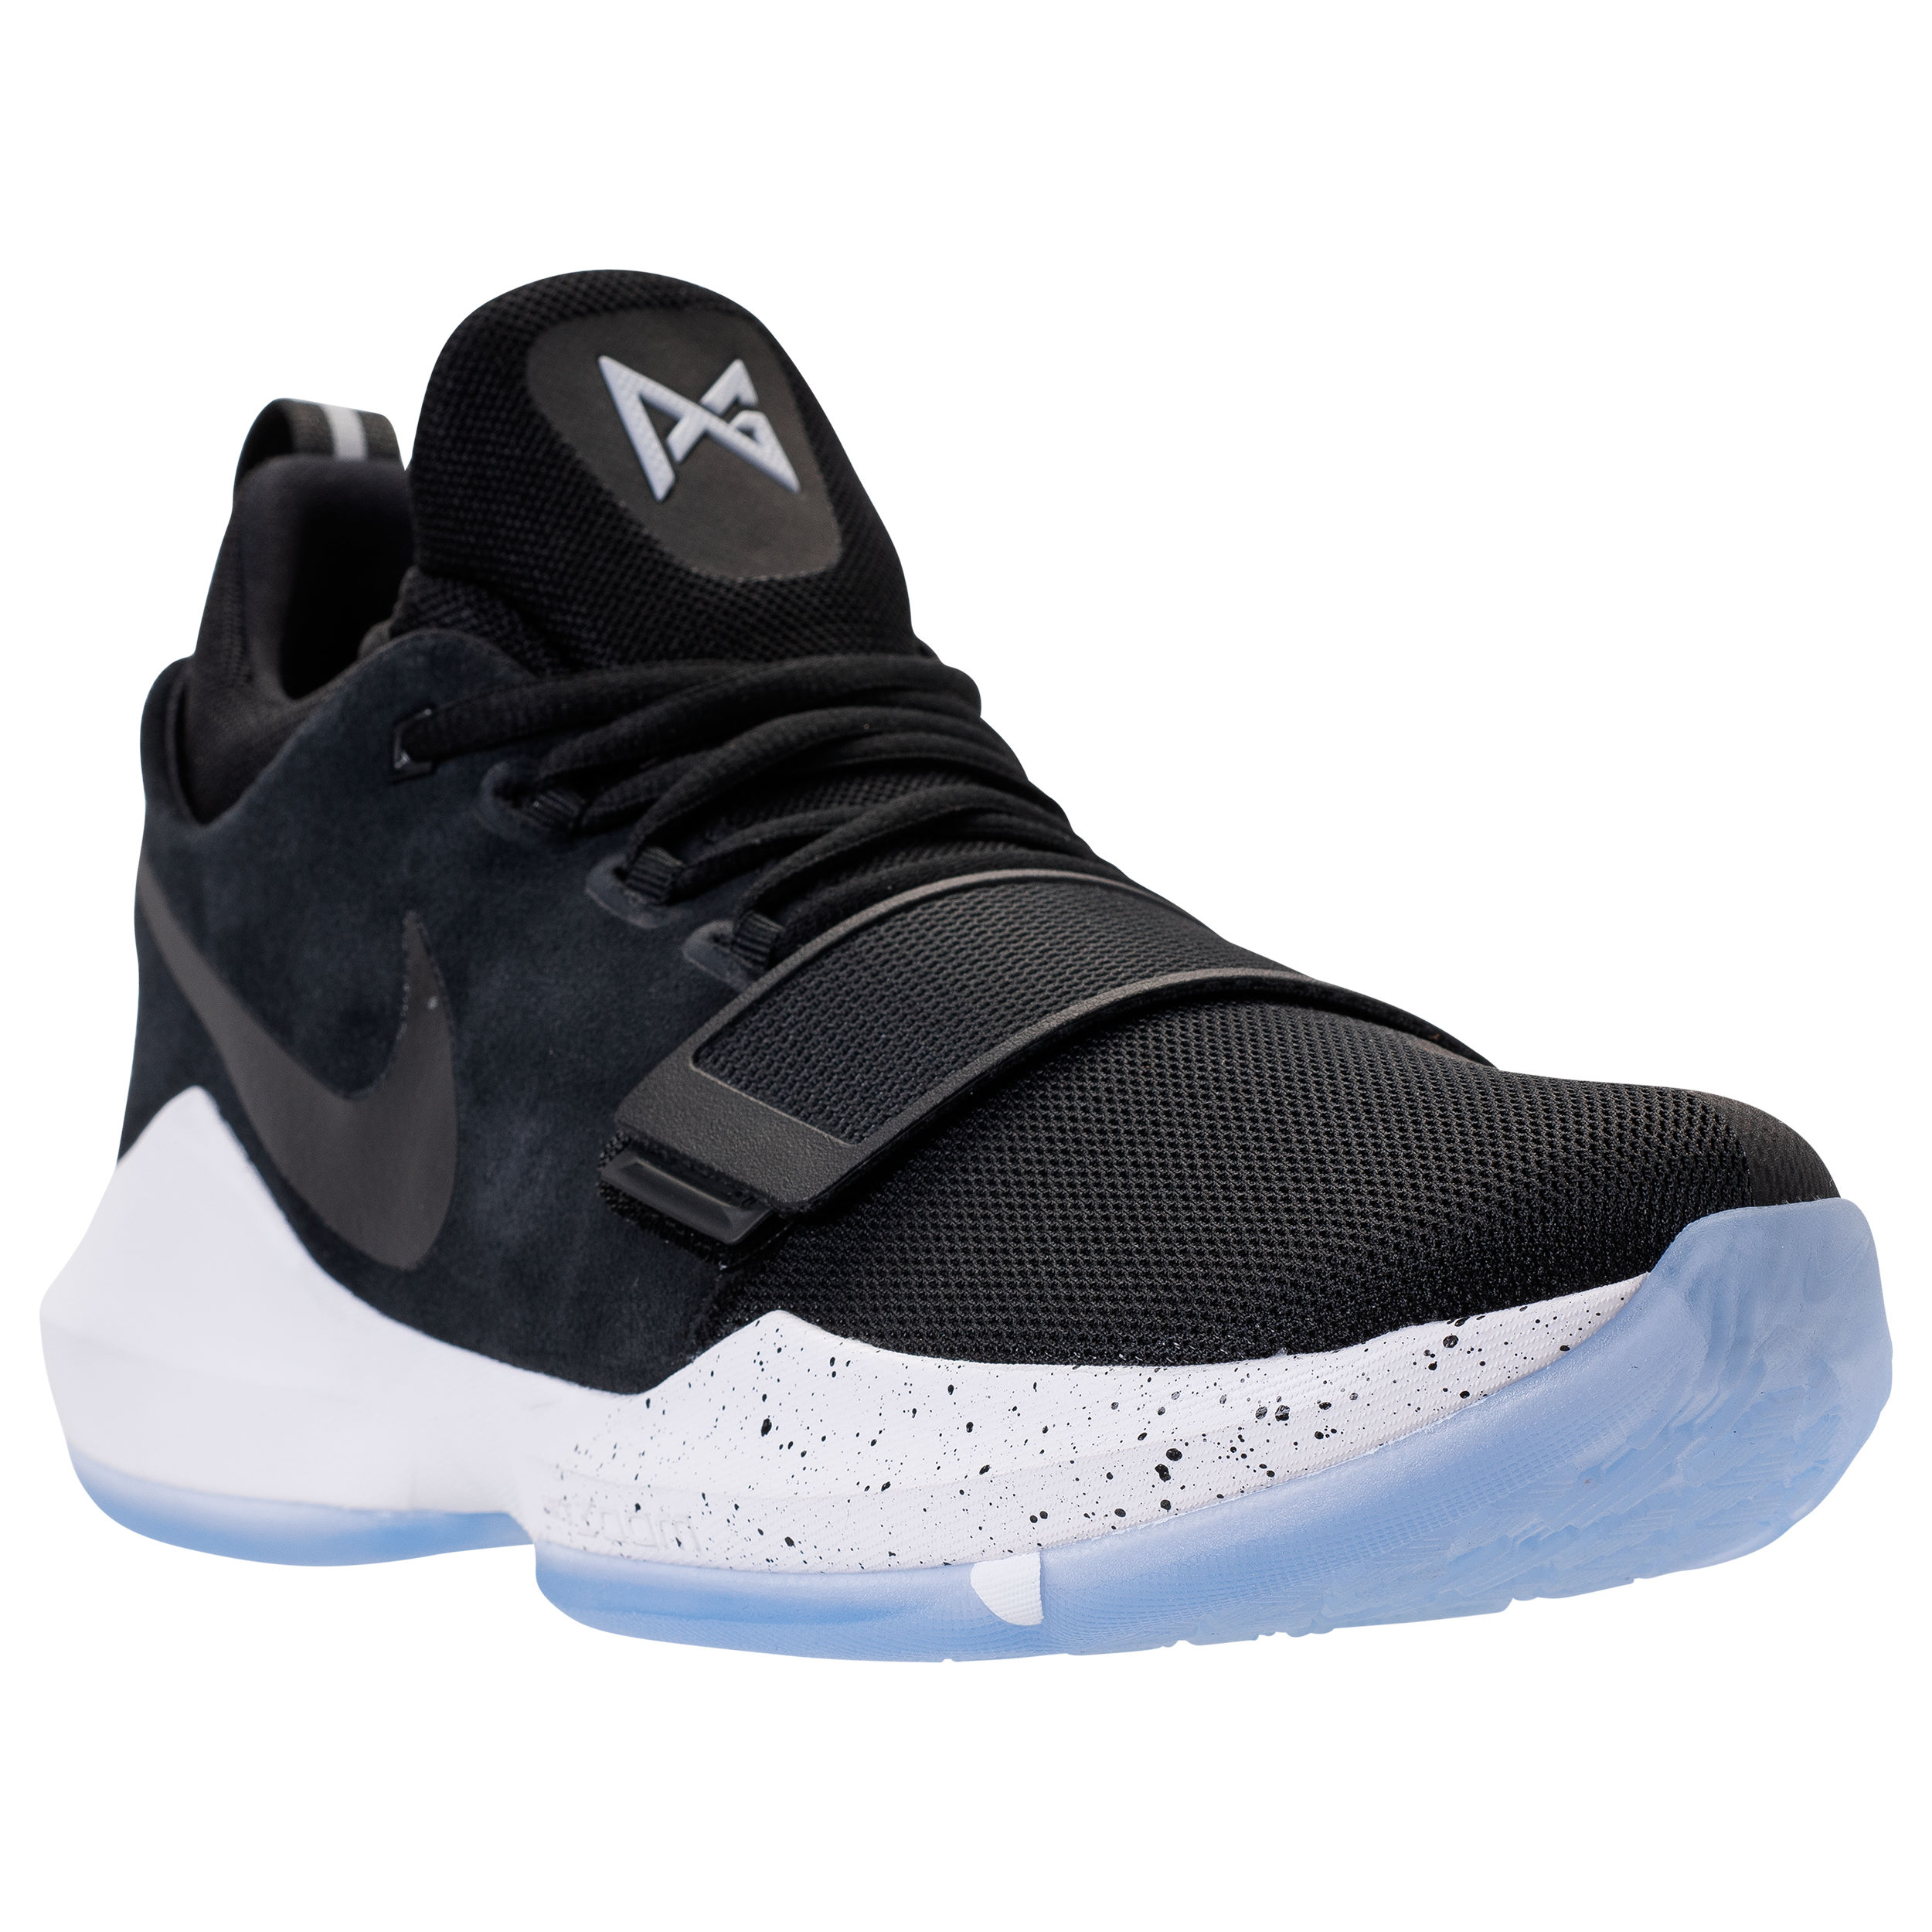 Nike PG1 'Black Ice' Has a Release Date 